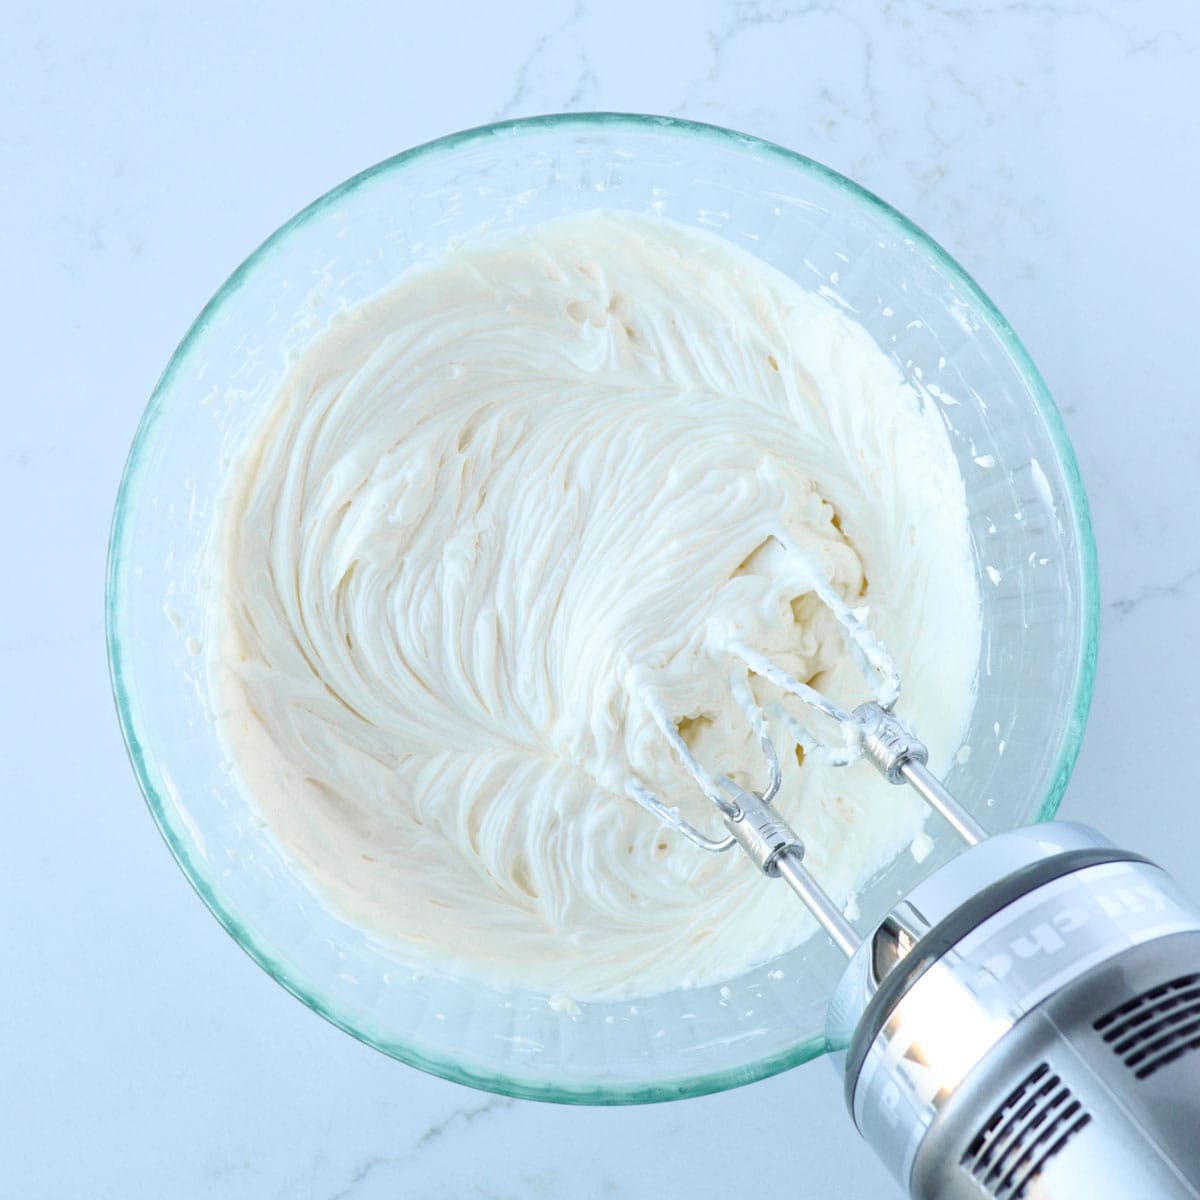 Softened cream cheese, powdered sugar, peppermint extract, and vanilla whipped together in a glass mixing bowl with an electric handheld mixer.